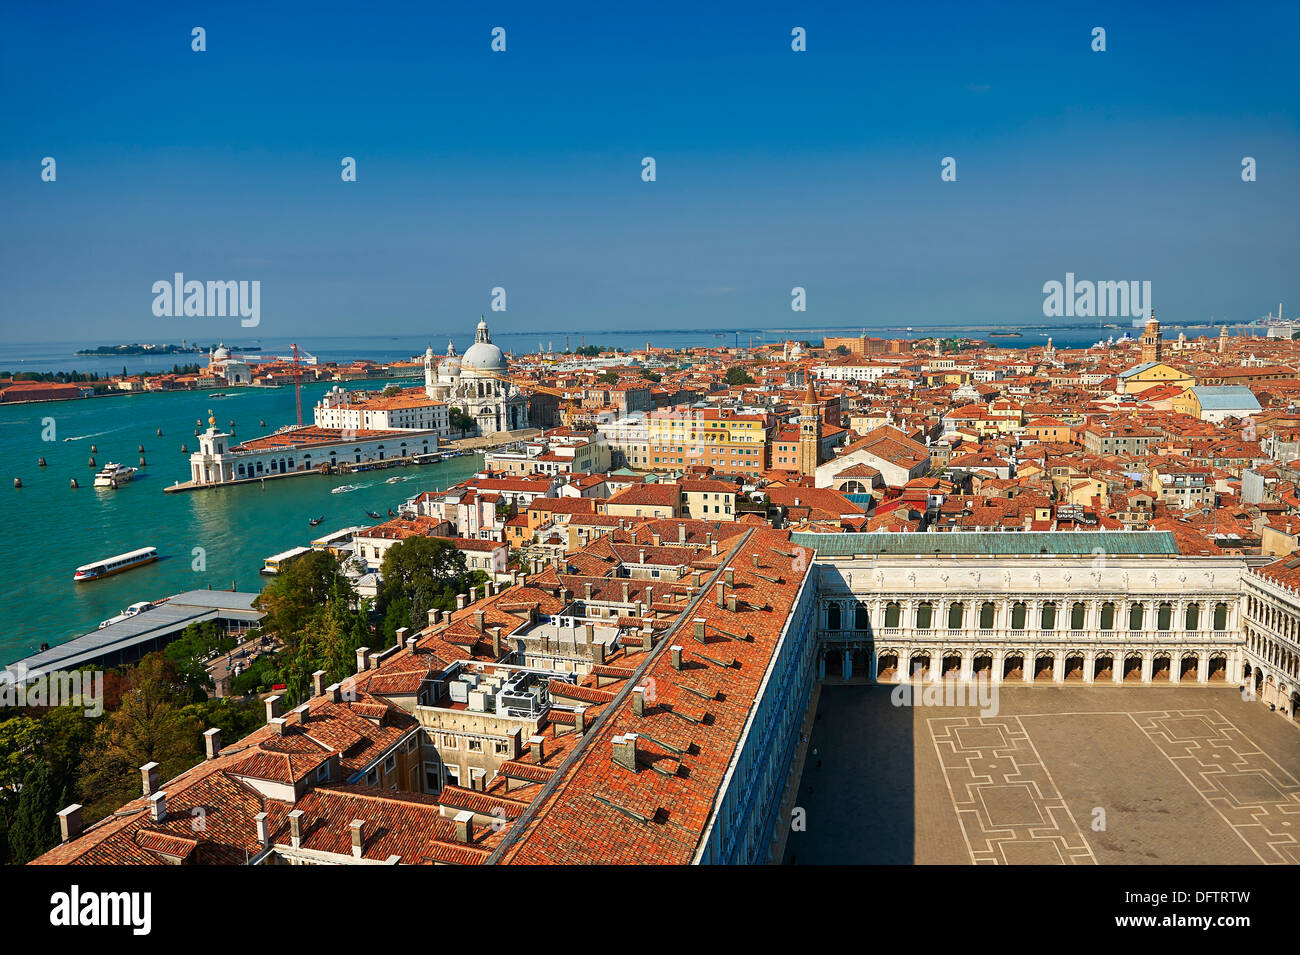 Piazza San Marco, St Mark's Square, and the roof tops of Venice, Venice, Venezien, Italy Stock Photo